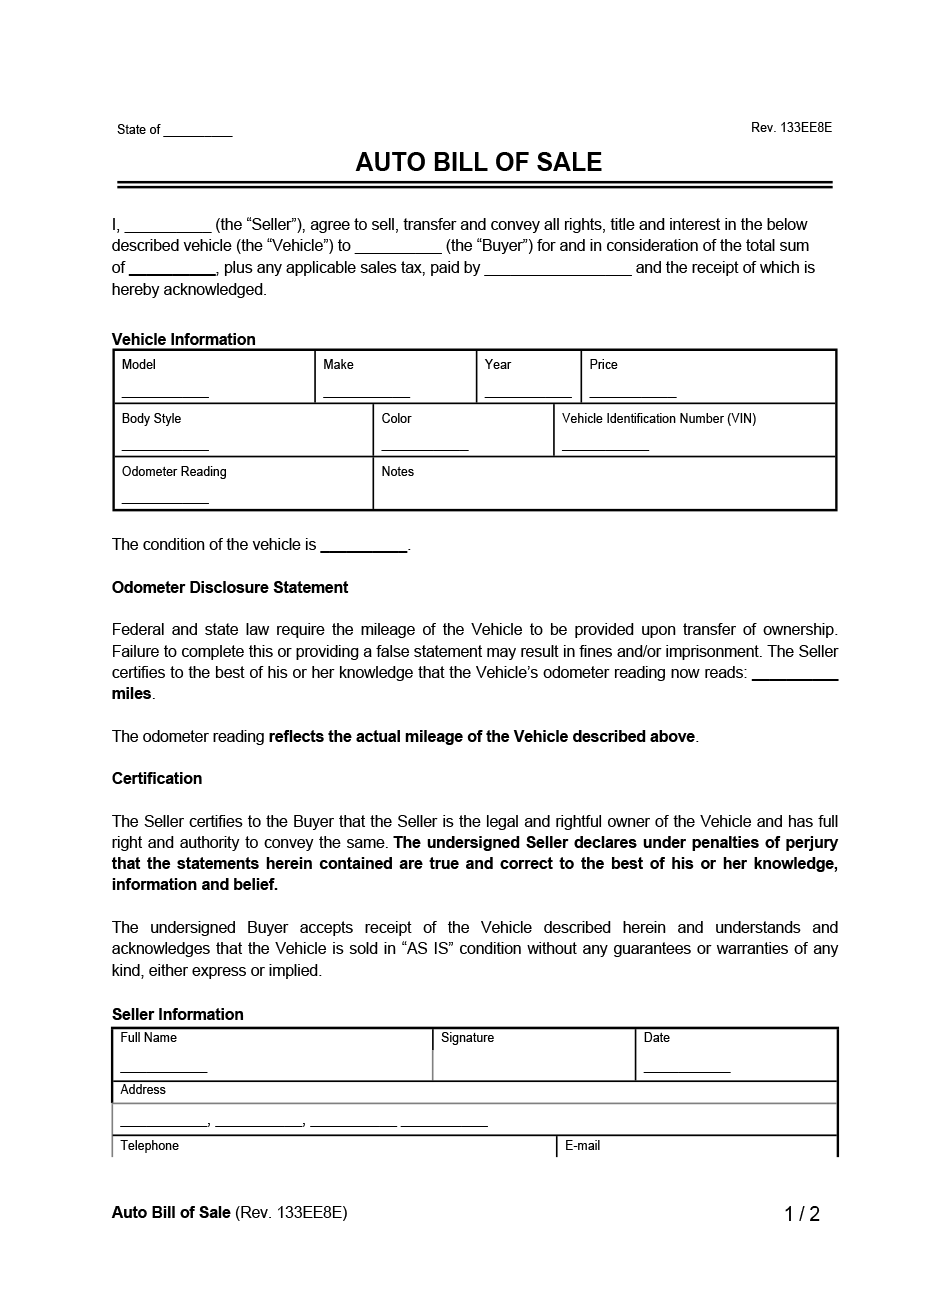 Free Vehicle Bill of Sale Form [For a Car] - PDF & Word Throughout Car Bill Of Sale Word Template